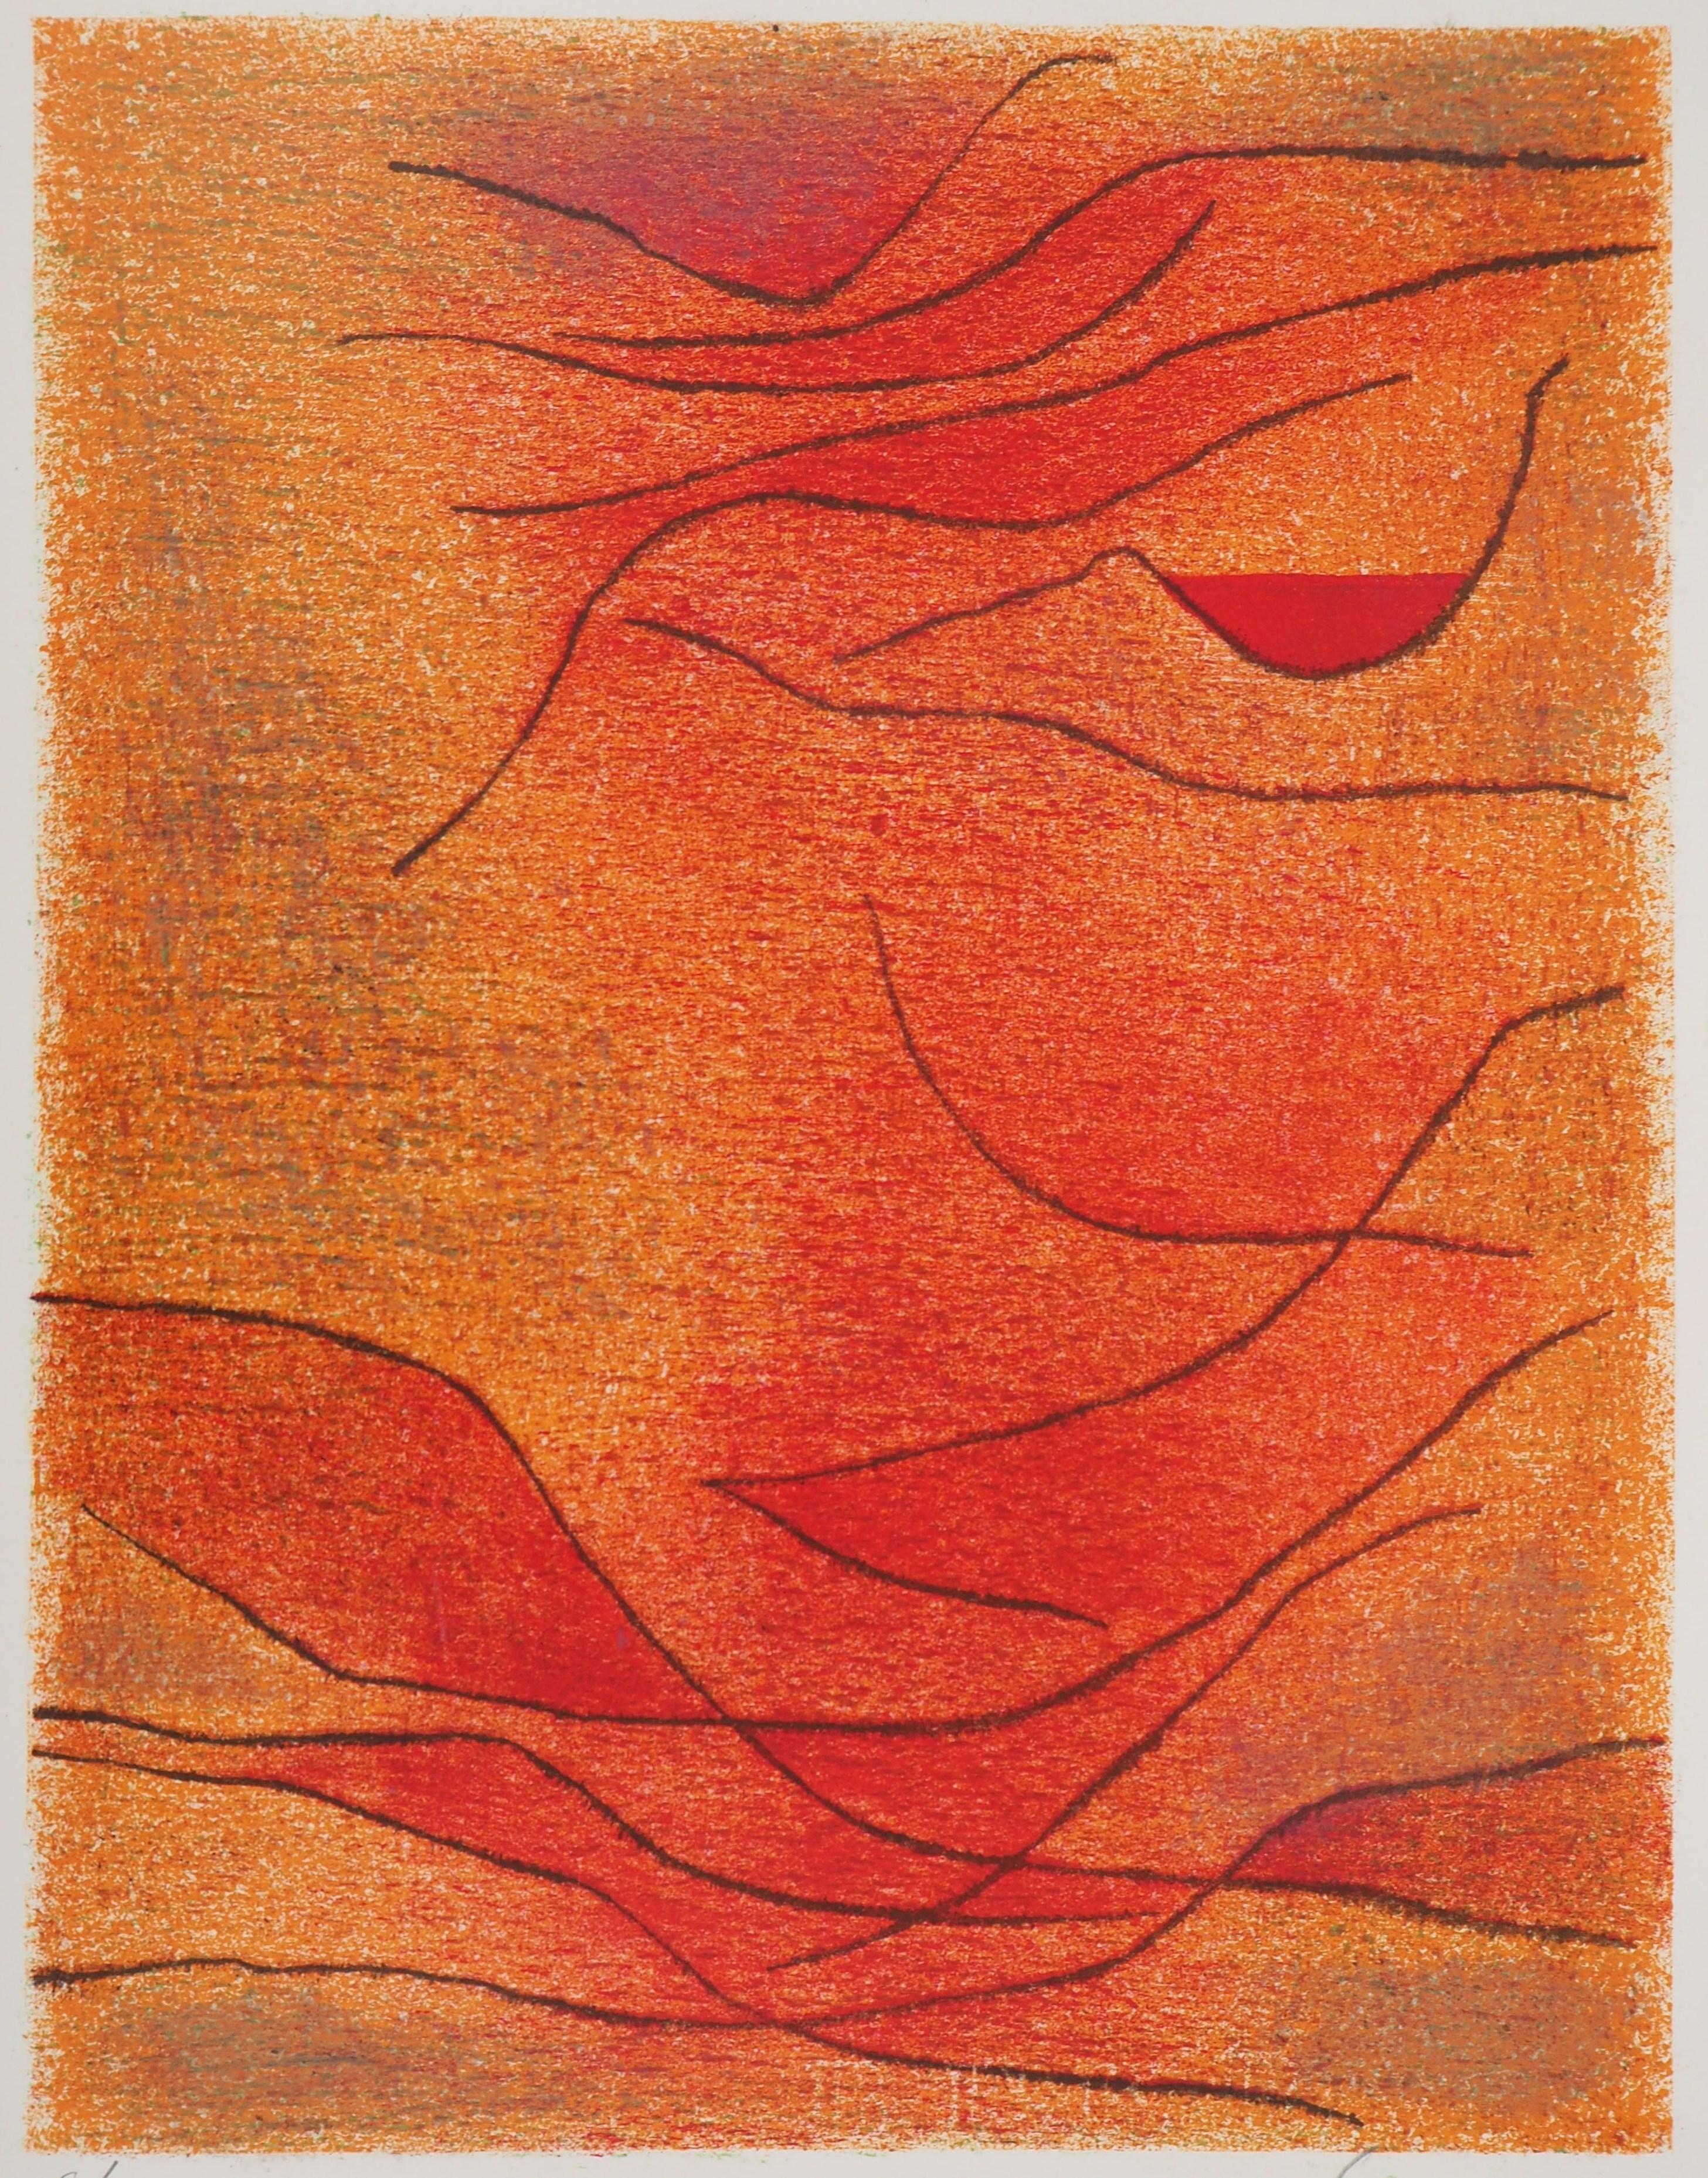 Orange and Red Composition is an original print realized by Gustave Singier in the 1959.

Mixed color lithograph on vellum paper.

Hand-signed in pencil on the lower right. Numbered on the lower left. Edition 6/200.

Beautiful mixed colored